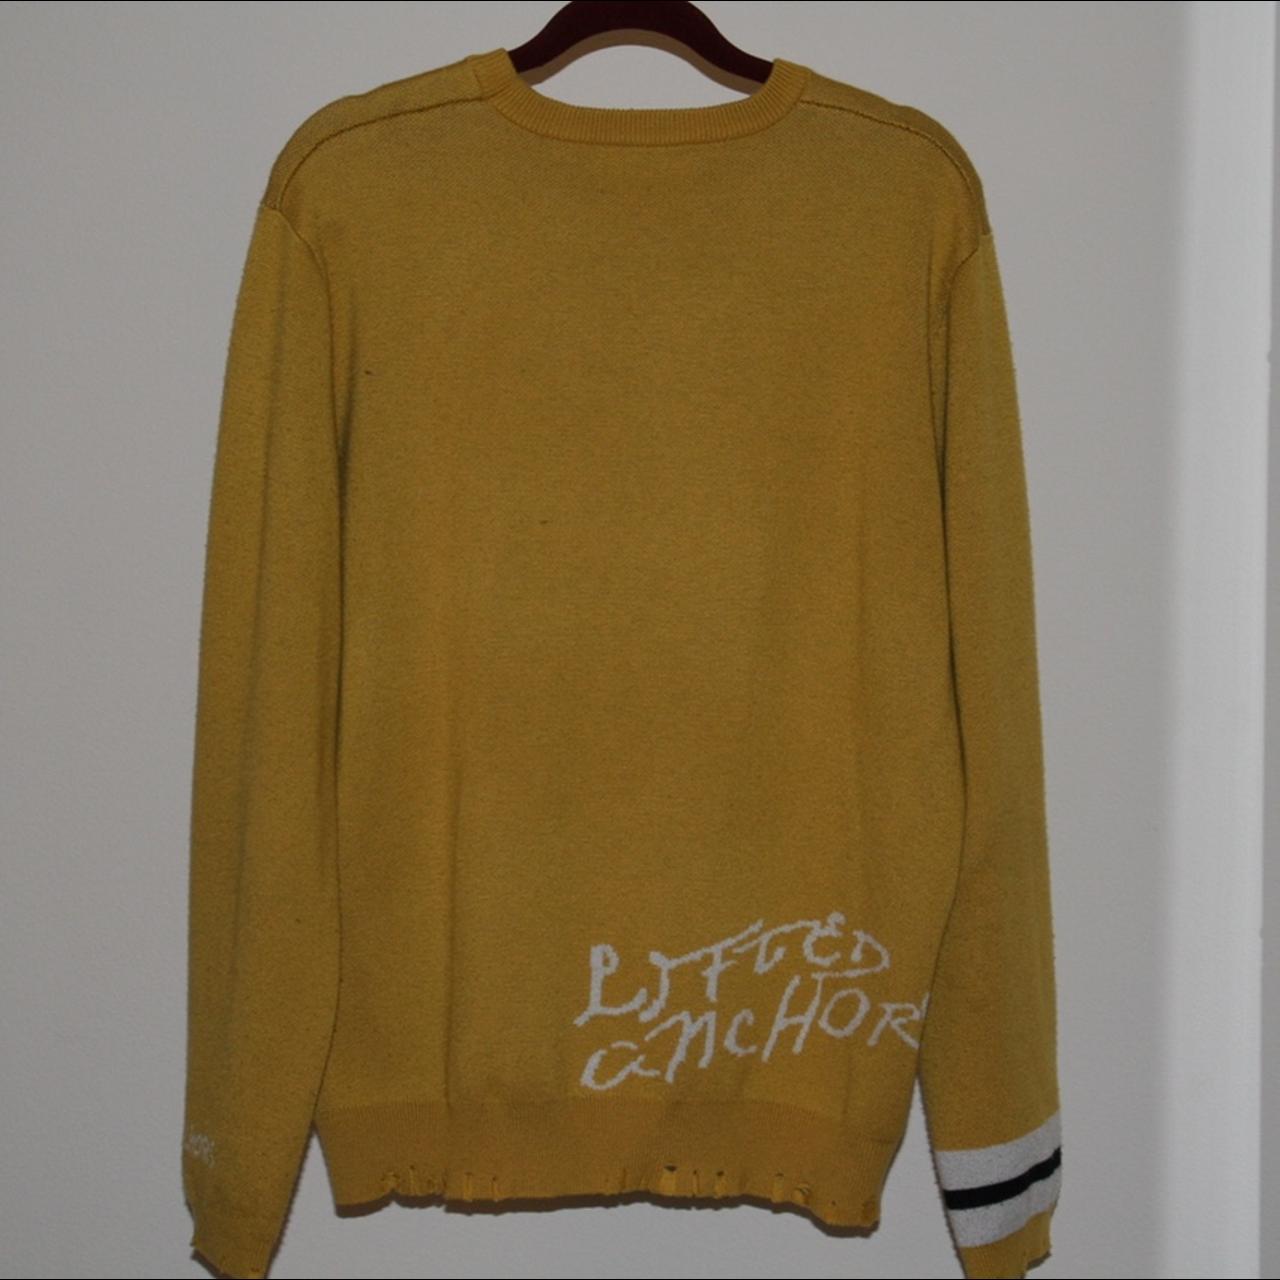 Lifted Anchors Men's Yellow and White Jumper (2)